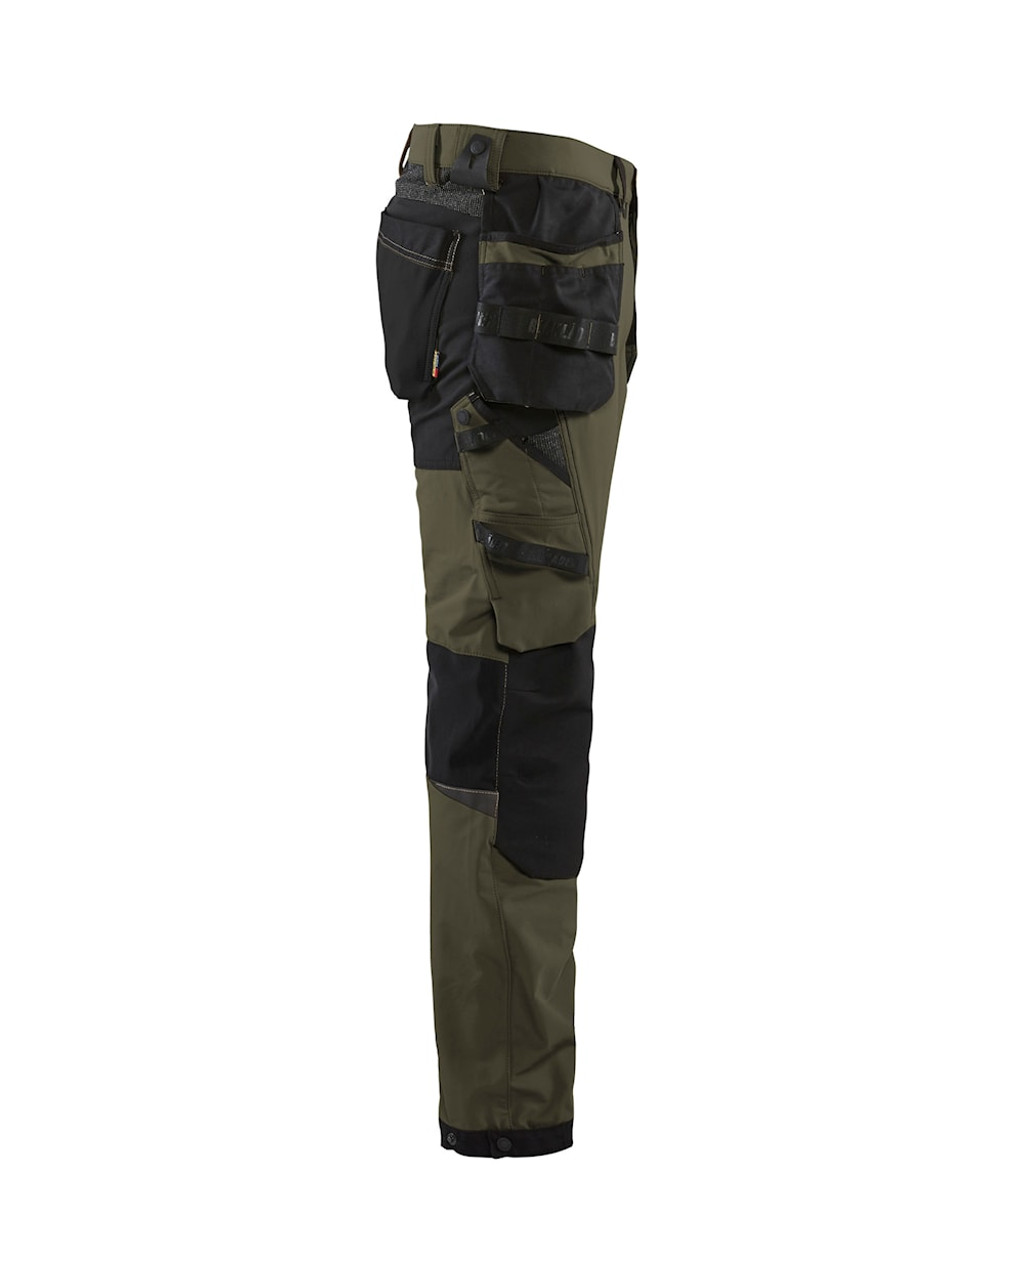 Buy Online BLAKLADER Dark Grey Trousers with Holster Pockets for the Solar Industry and Installers in Perth, Sydney and Brisbane